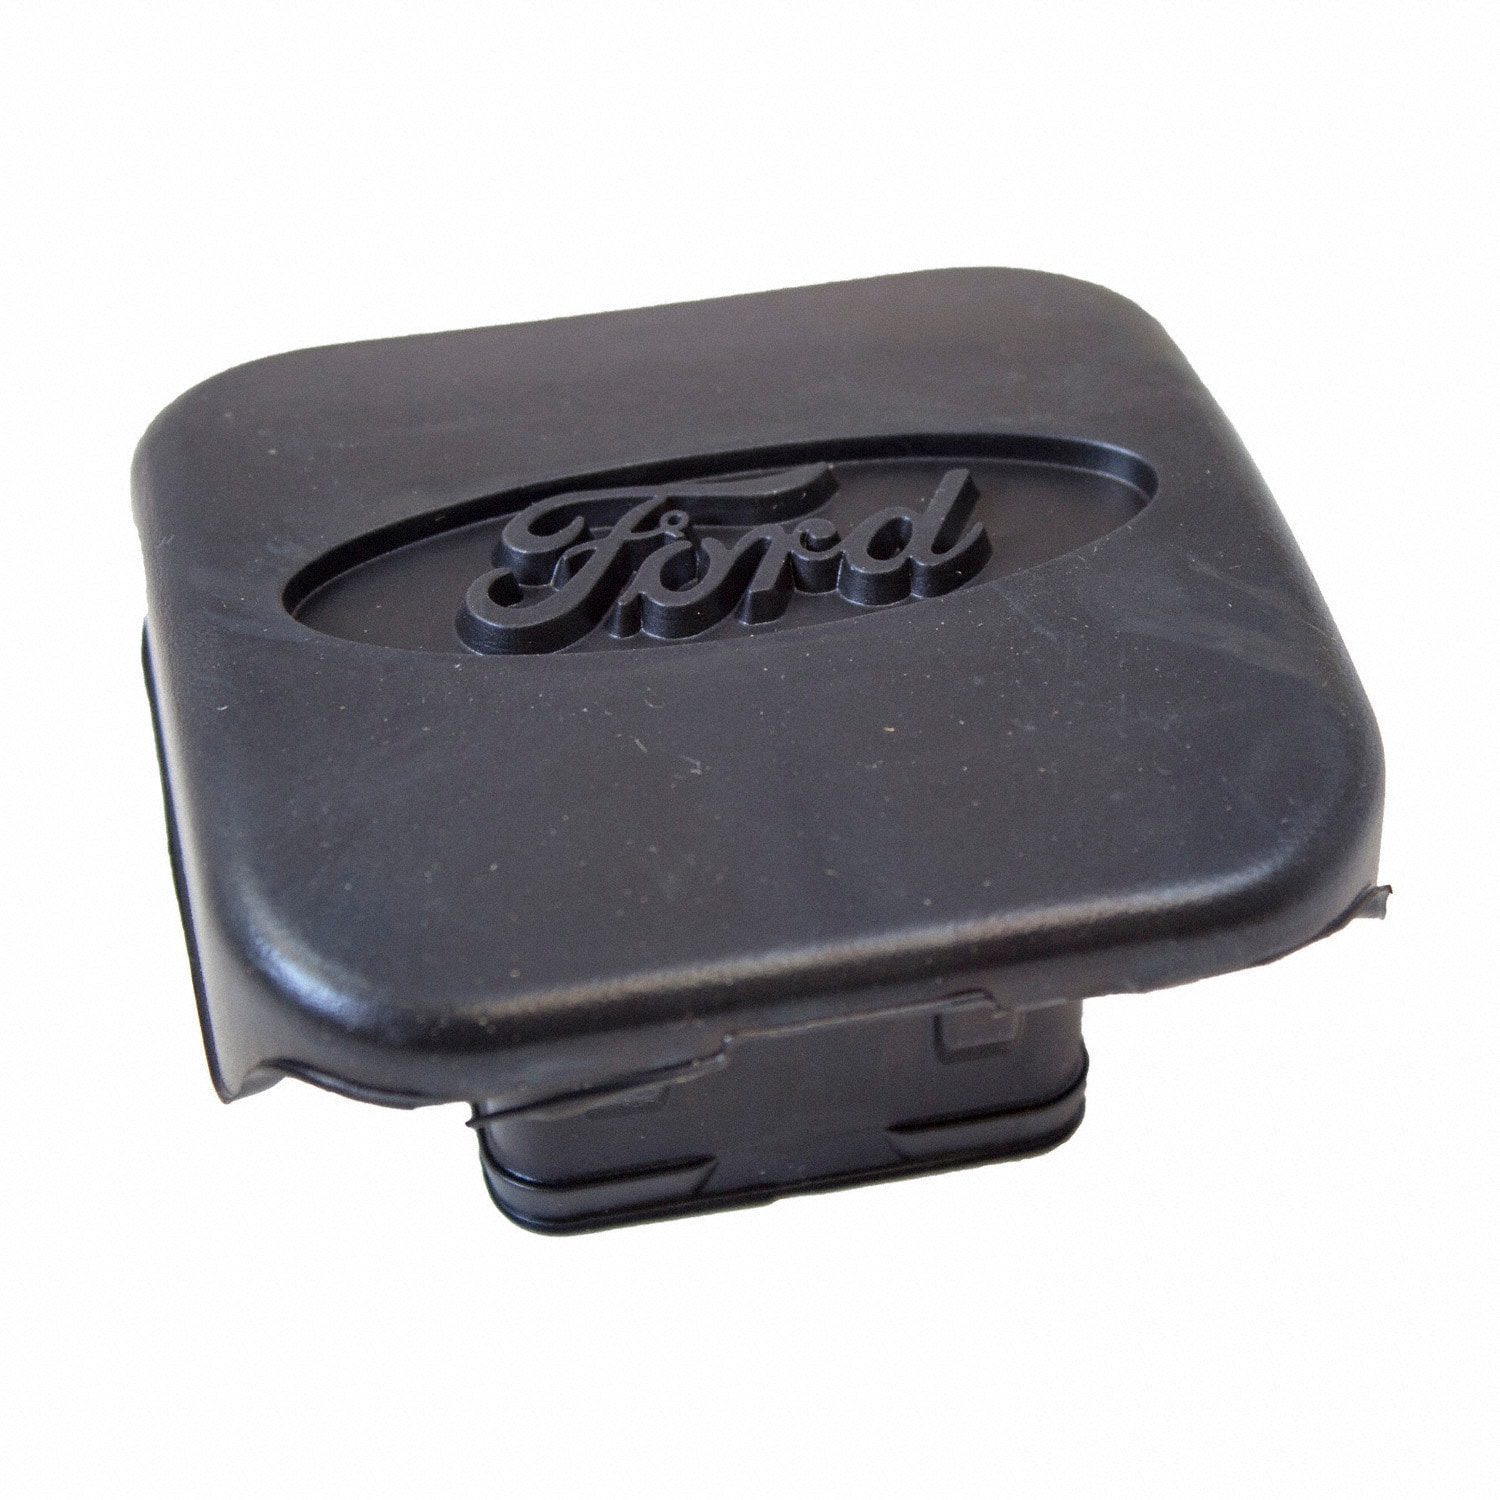 Lets see your Trailer Hitch covers - Ford F150 Forum - Community of ...